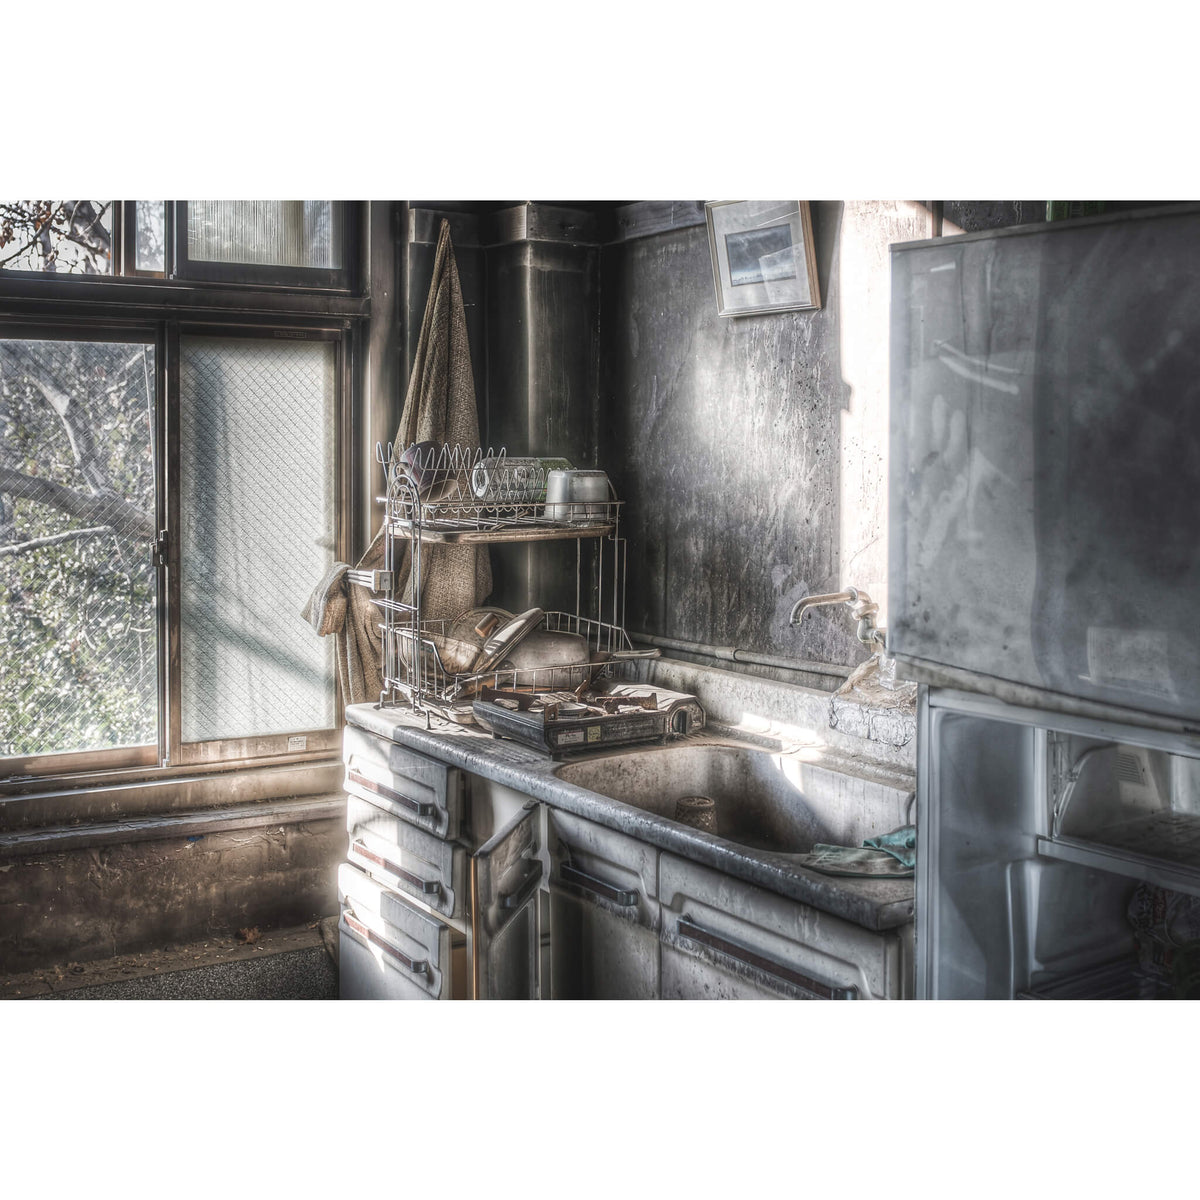 Another Kitchen | Seika Dormitory Fine Art Print - Lost Collective Shop